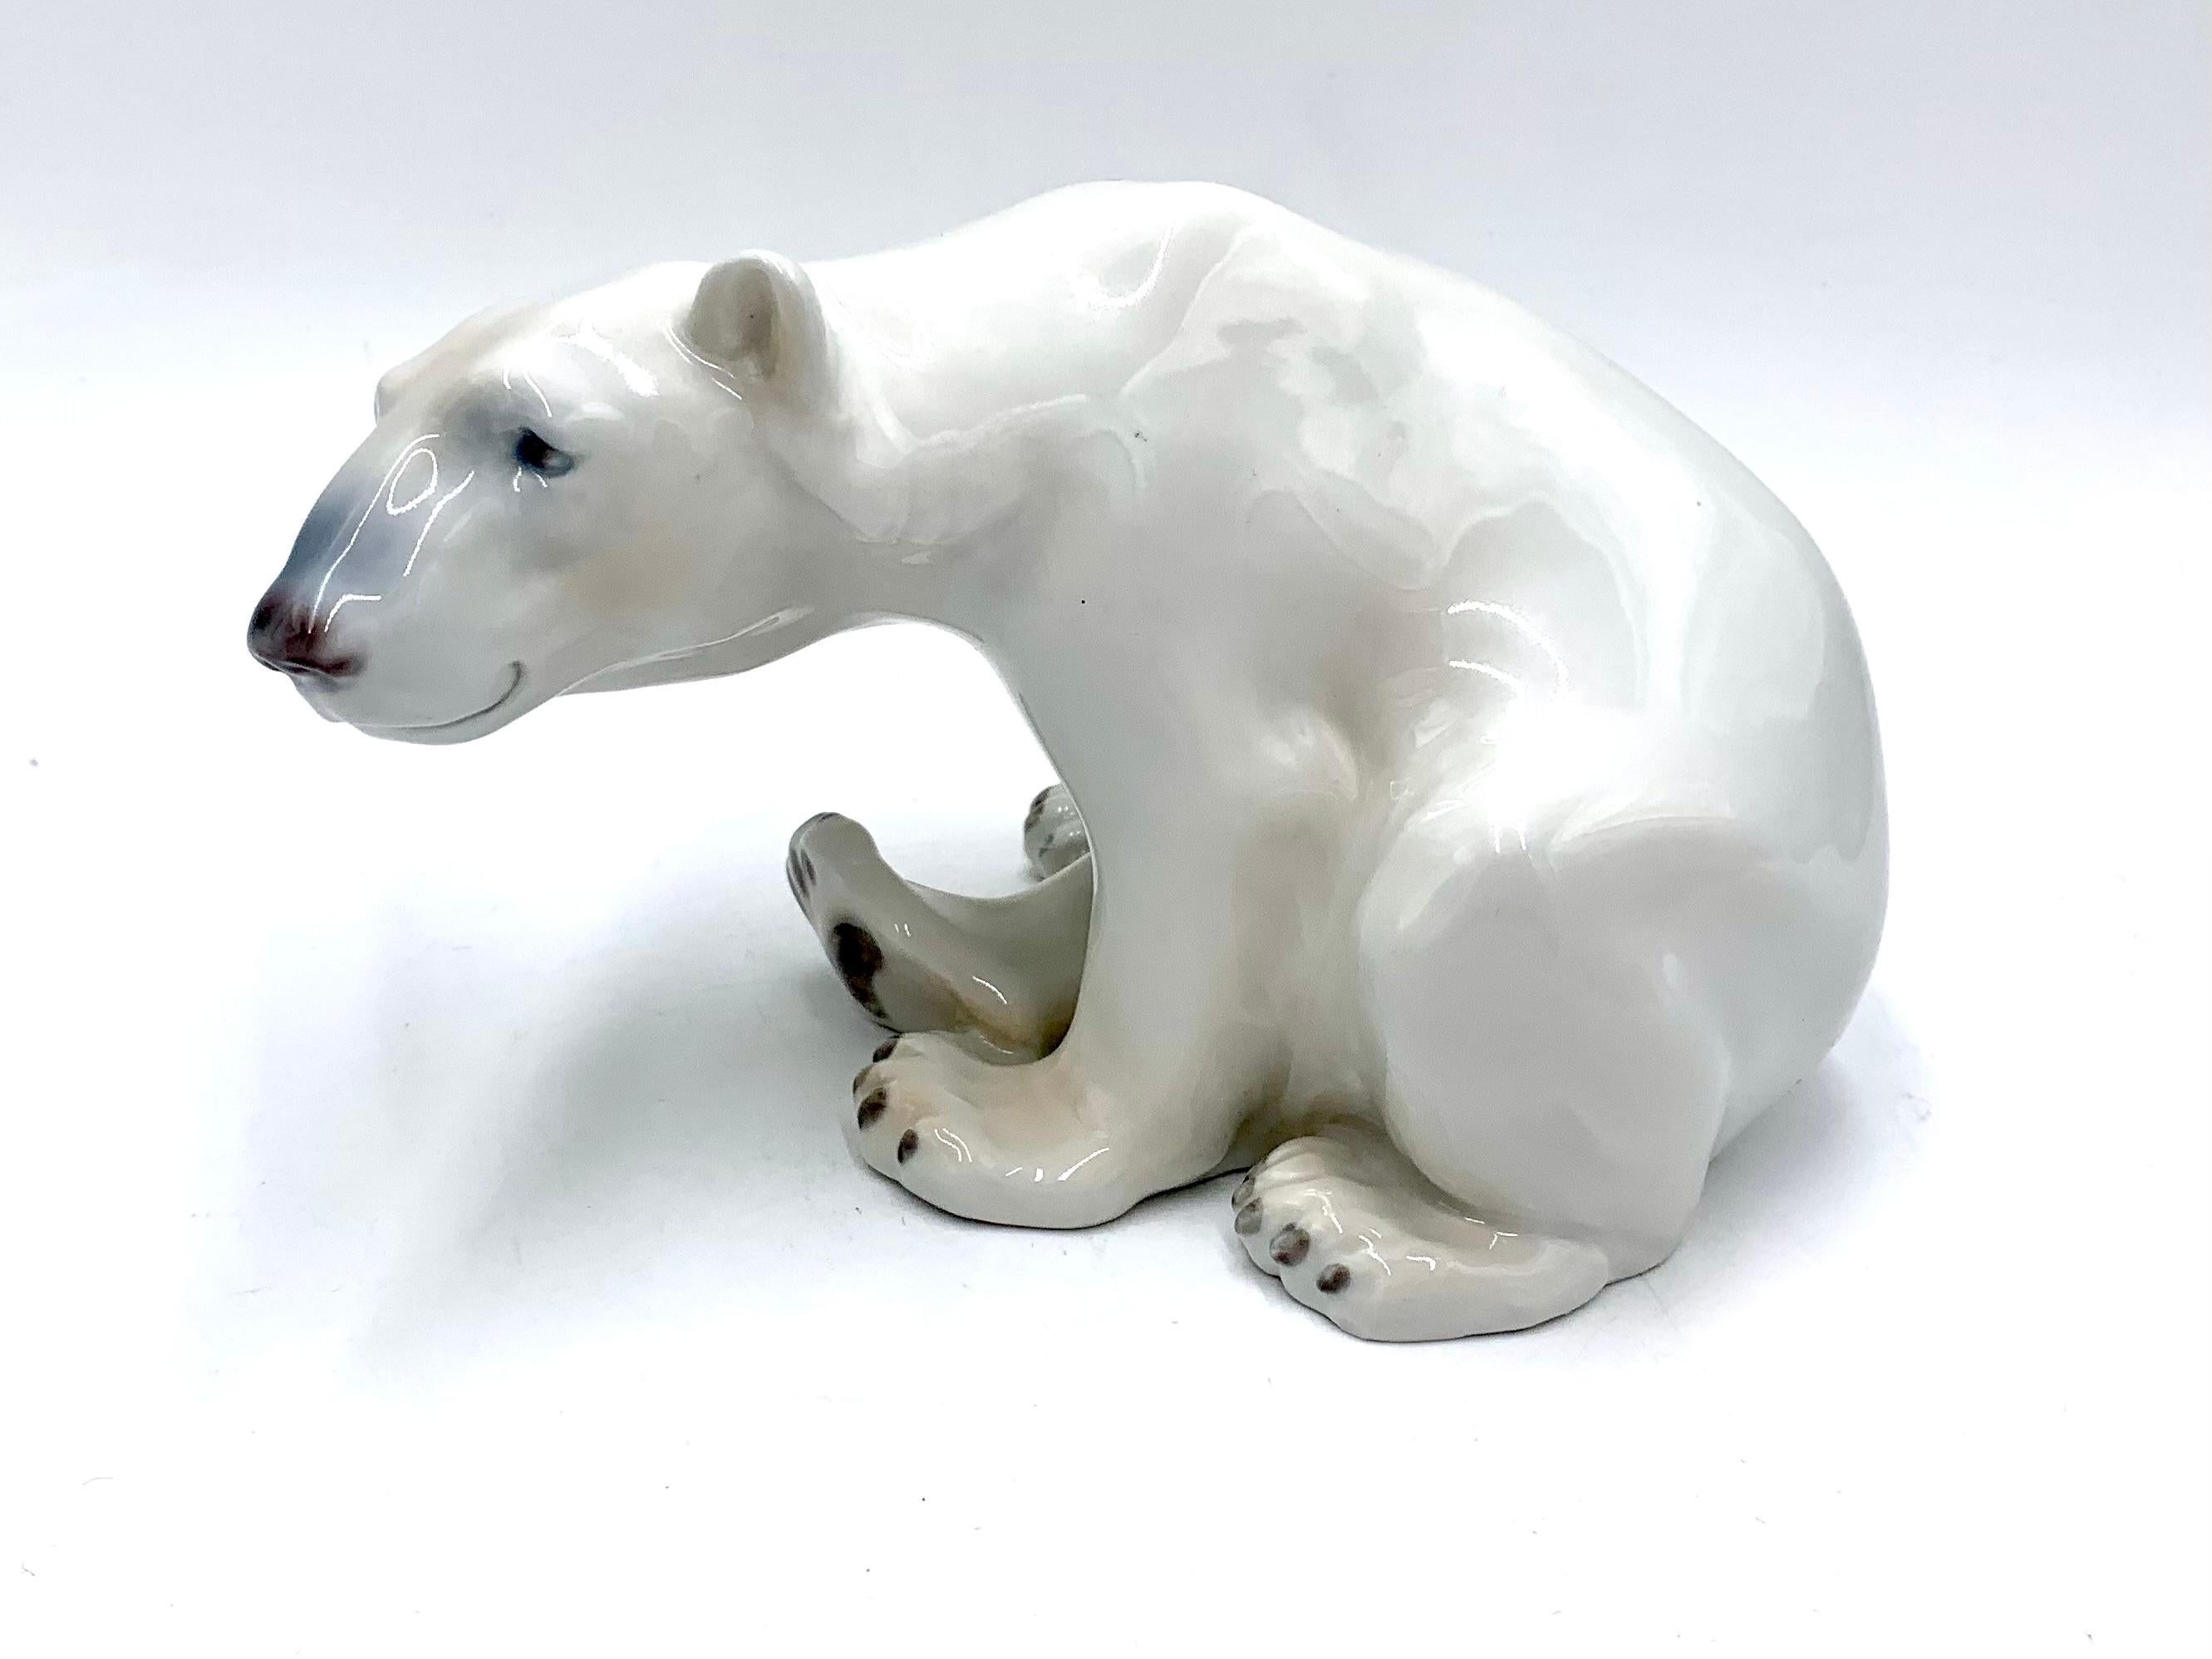 Porcelain figurine of a sitting polar bear

Made in Denmark by Bing & Grondahl

Produced in 1970-1980.

Model number # 1629

Very good condition, no damage.

Measures: height 12.5 cm width 20 cm depth 13 cm.